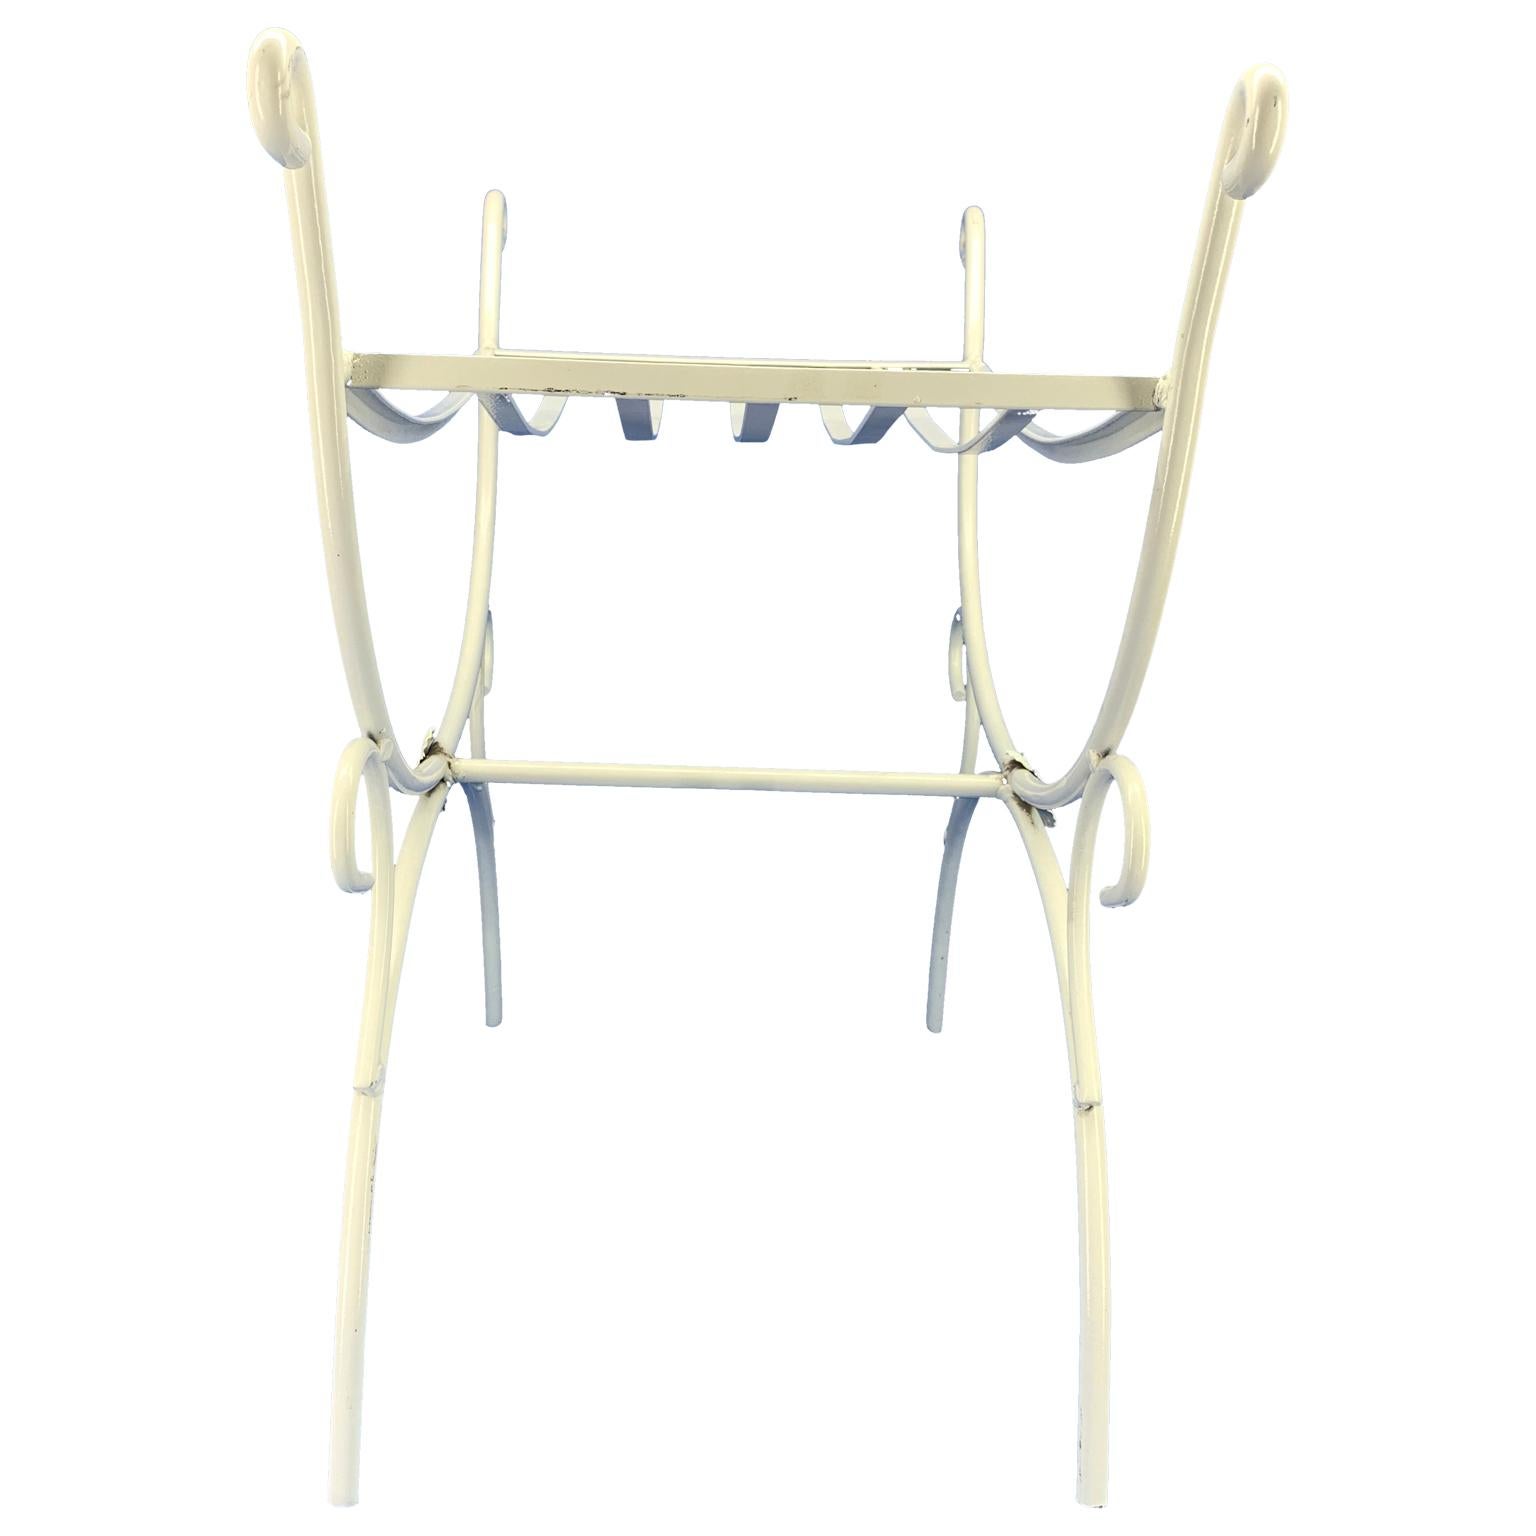 American White Powder-Coated Metal Stool Or Bench For Sale